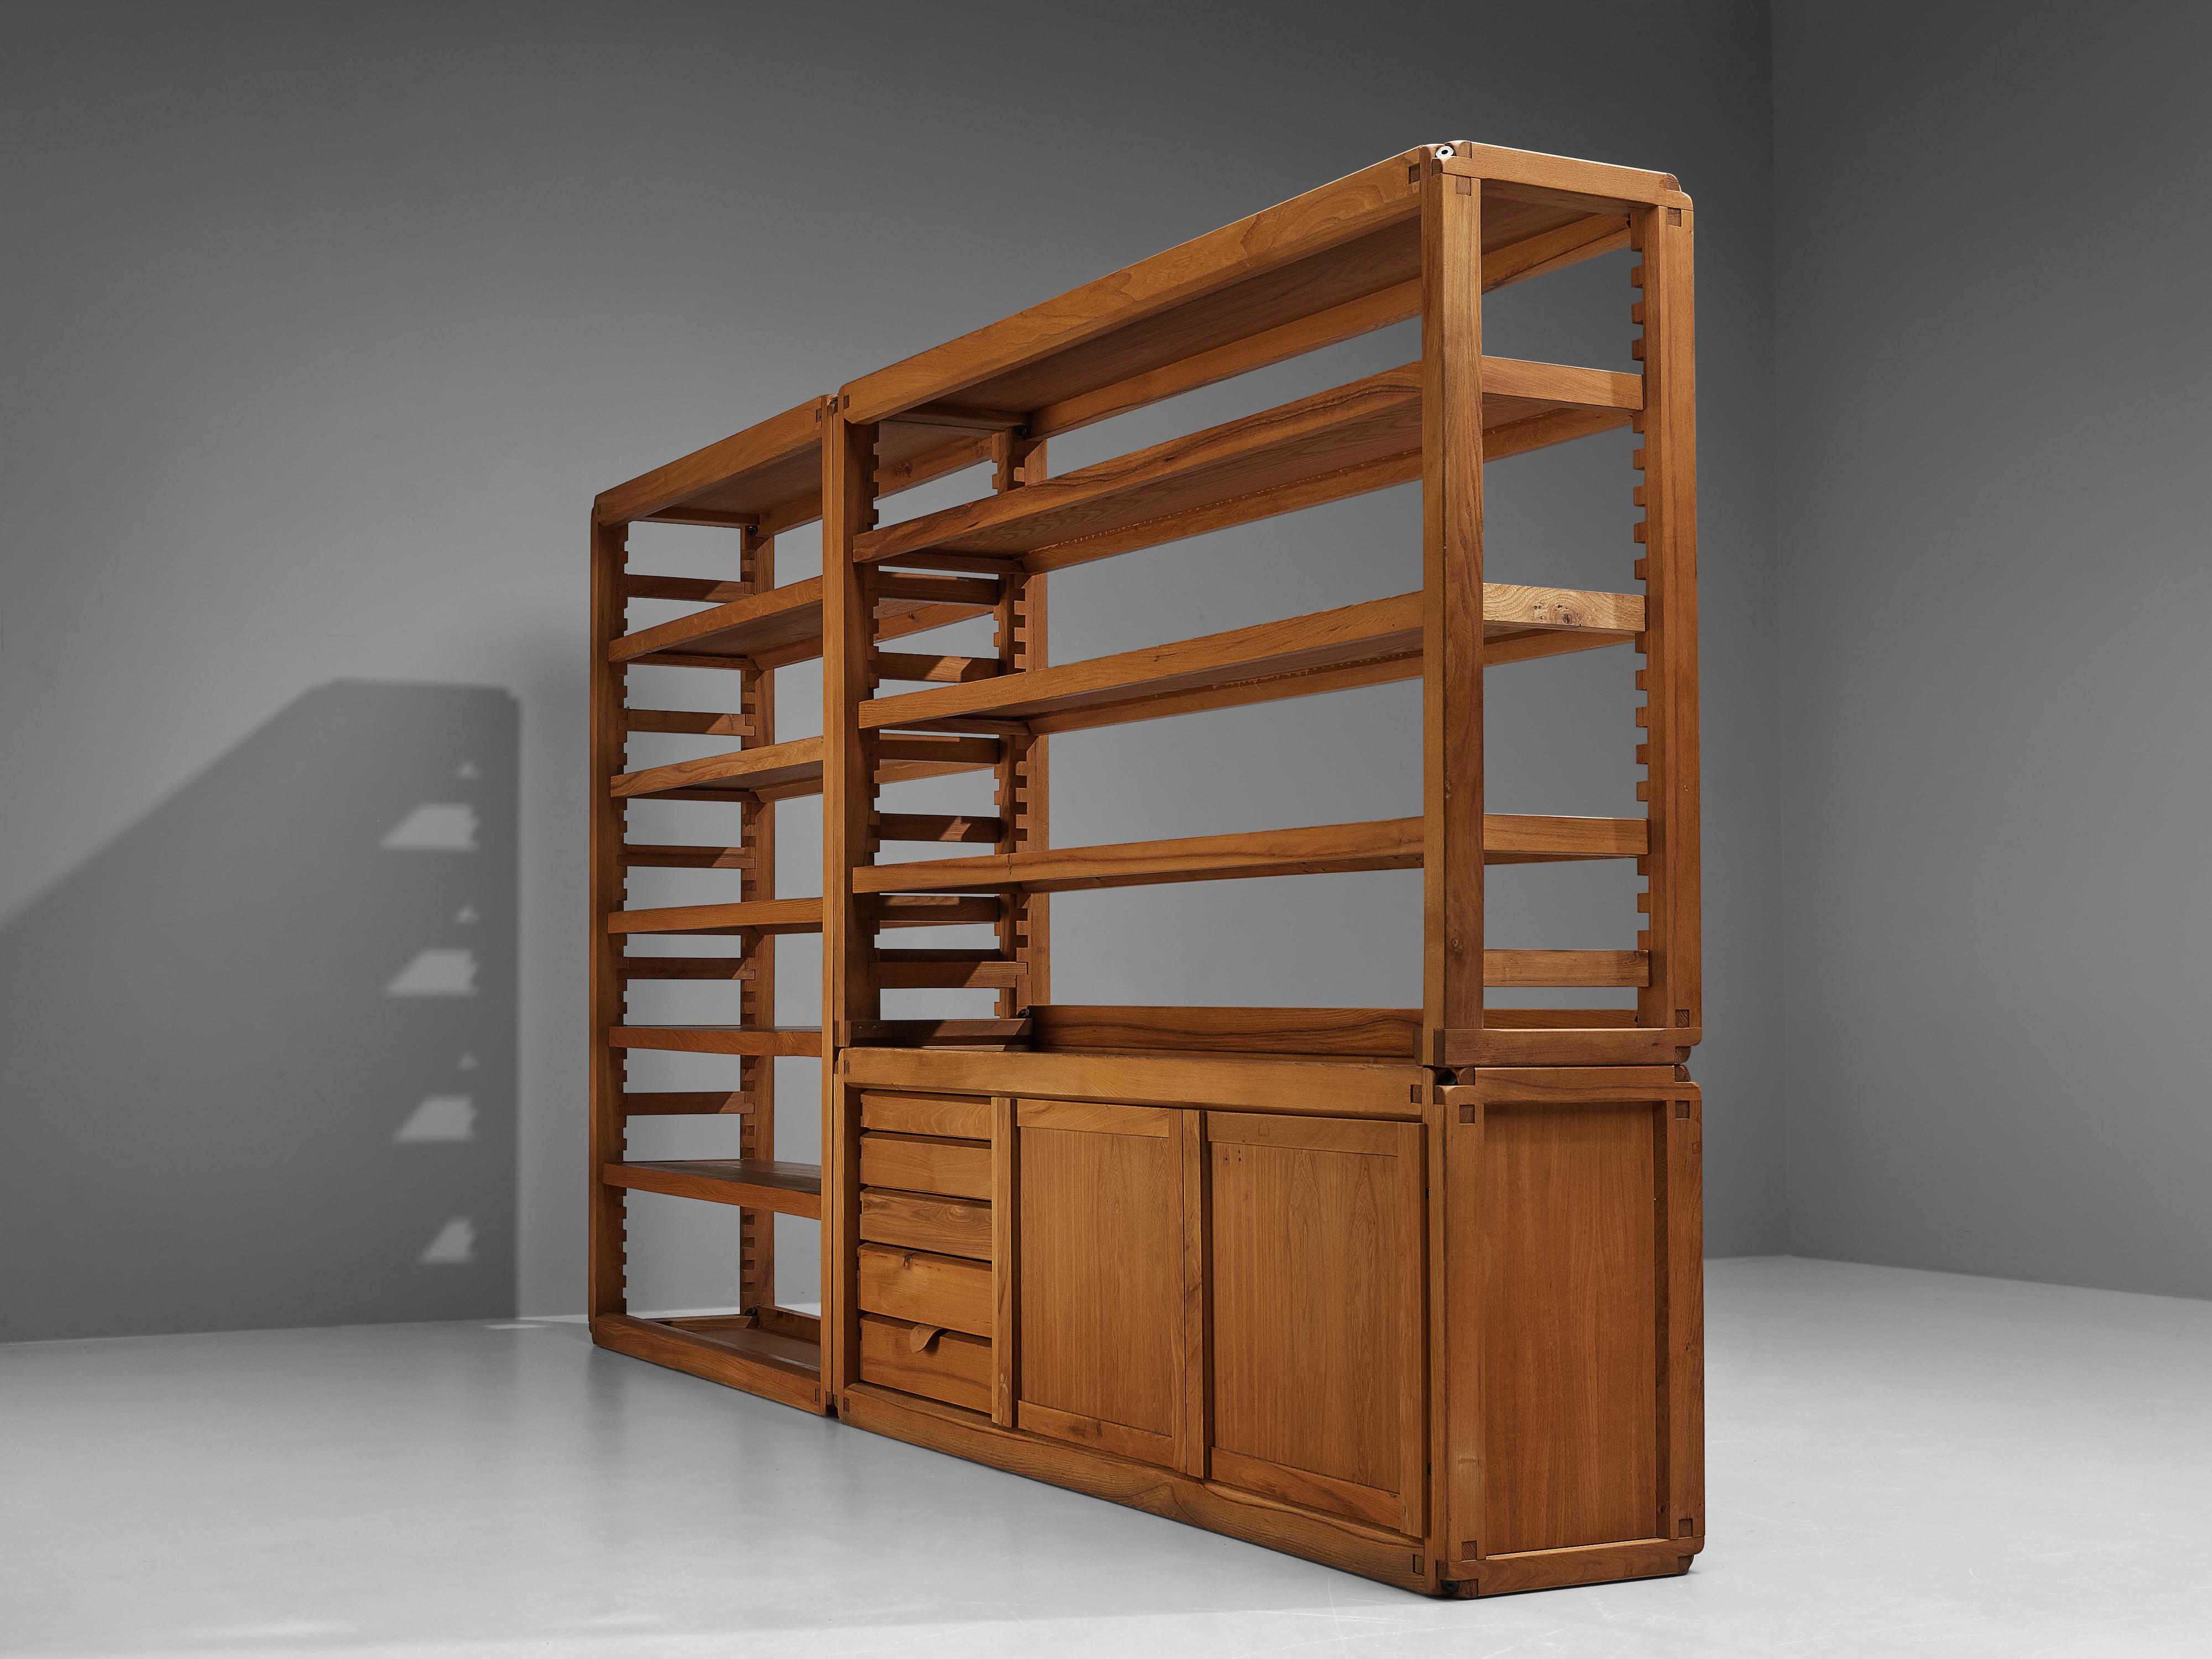 Pierre Chapo, pair of bookcases model 'B10', elm, France, 1960s

These versatile shelves model 'B10' are designed by Pierre Chapo. The shelving system was created in the 1960s. This robust and solid bookcase consists of a closed compartment with